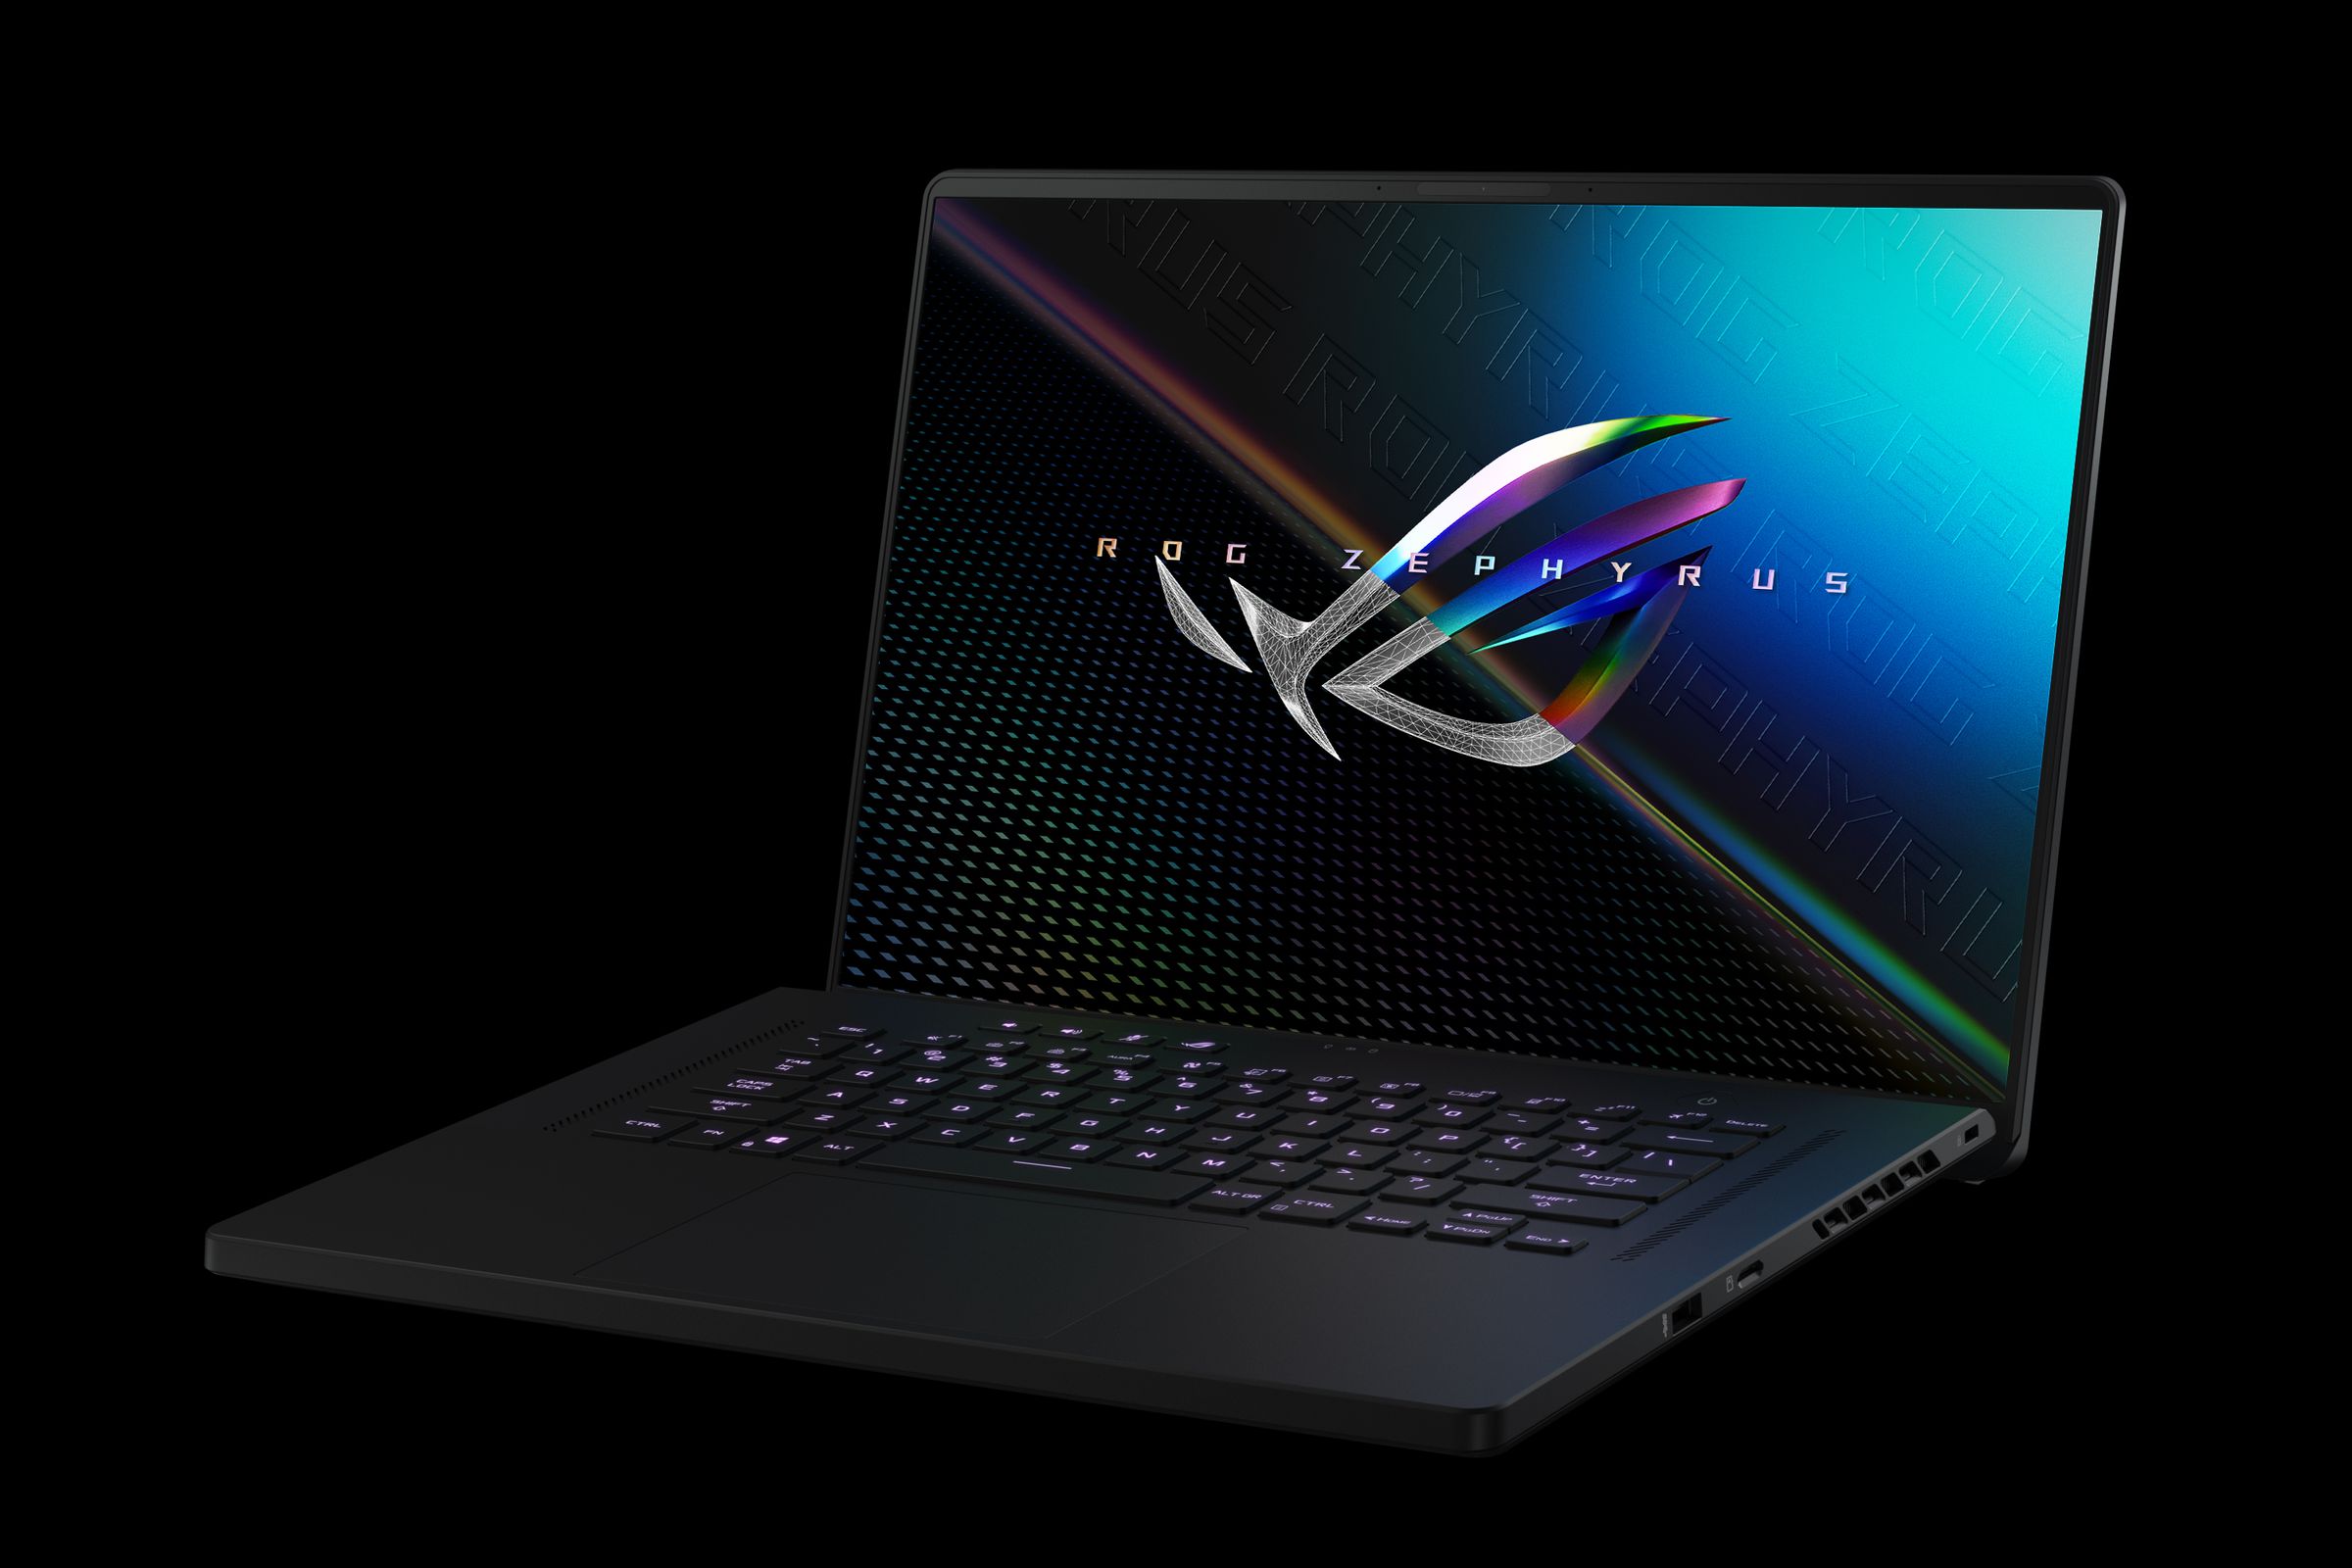 The Asus ROG Zephyrus M16 open, angled slightly to the left on a black background. The screen displays the ROG logo.